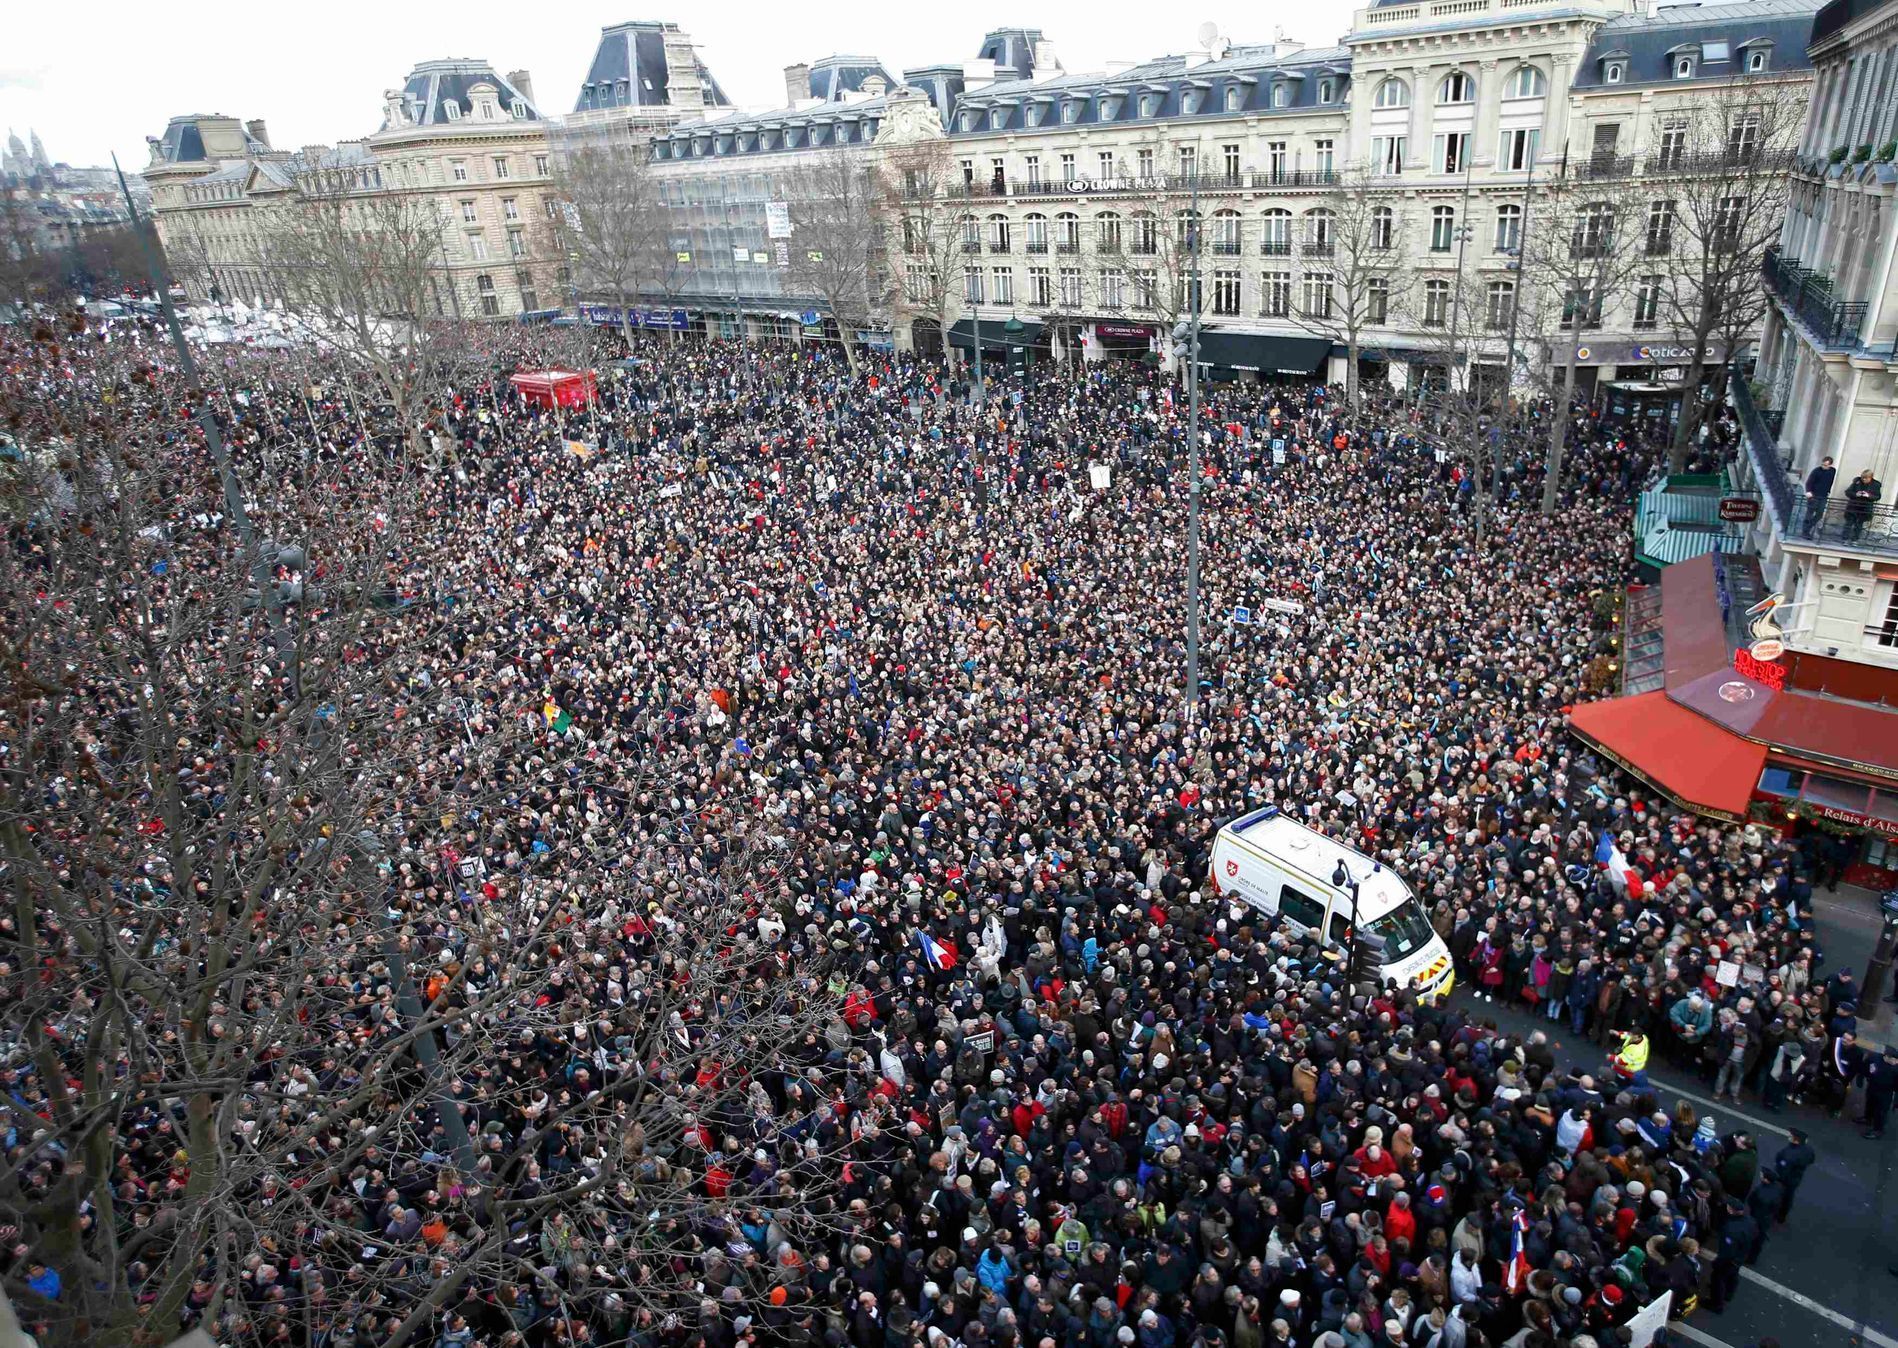 A general view shows an ambulance surrounded by hundreds of thousands of people gathering on the Place de la Republique to attend the solidarity march in the streets of Paris